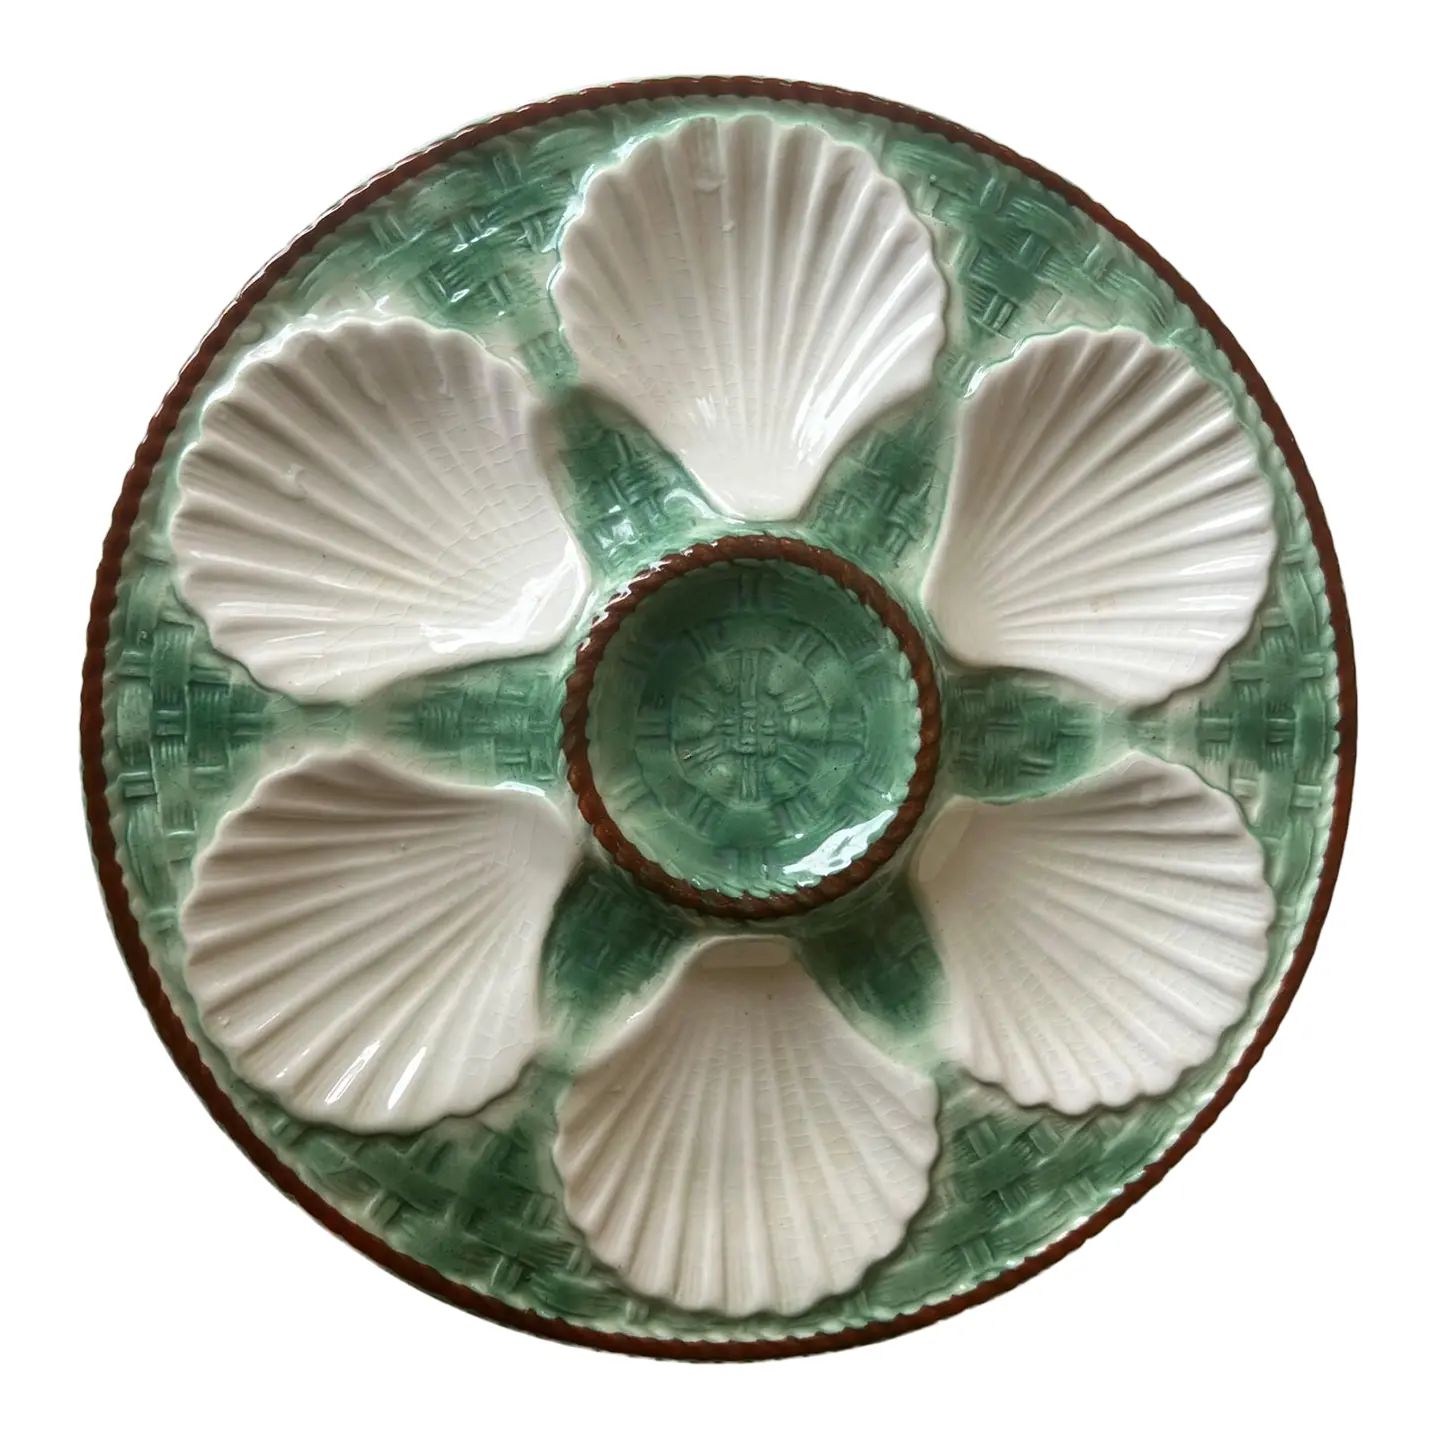 Vintage Green Majolica Oyster Plate by Longchamp | Chairish